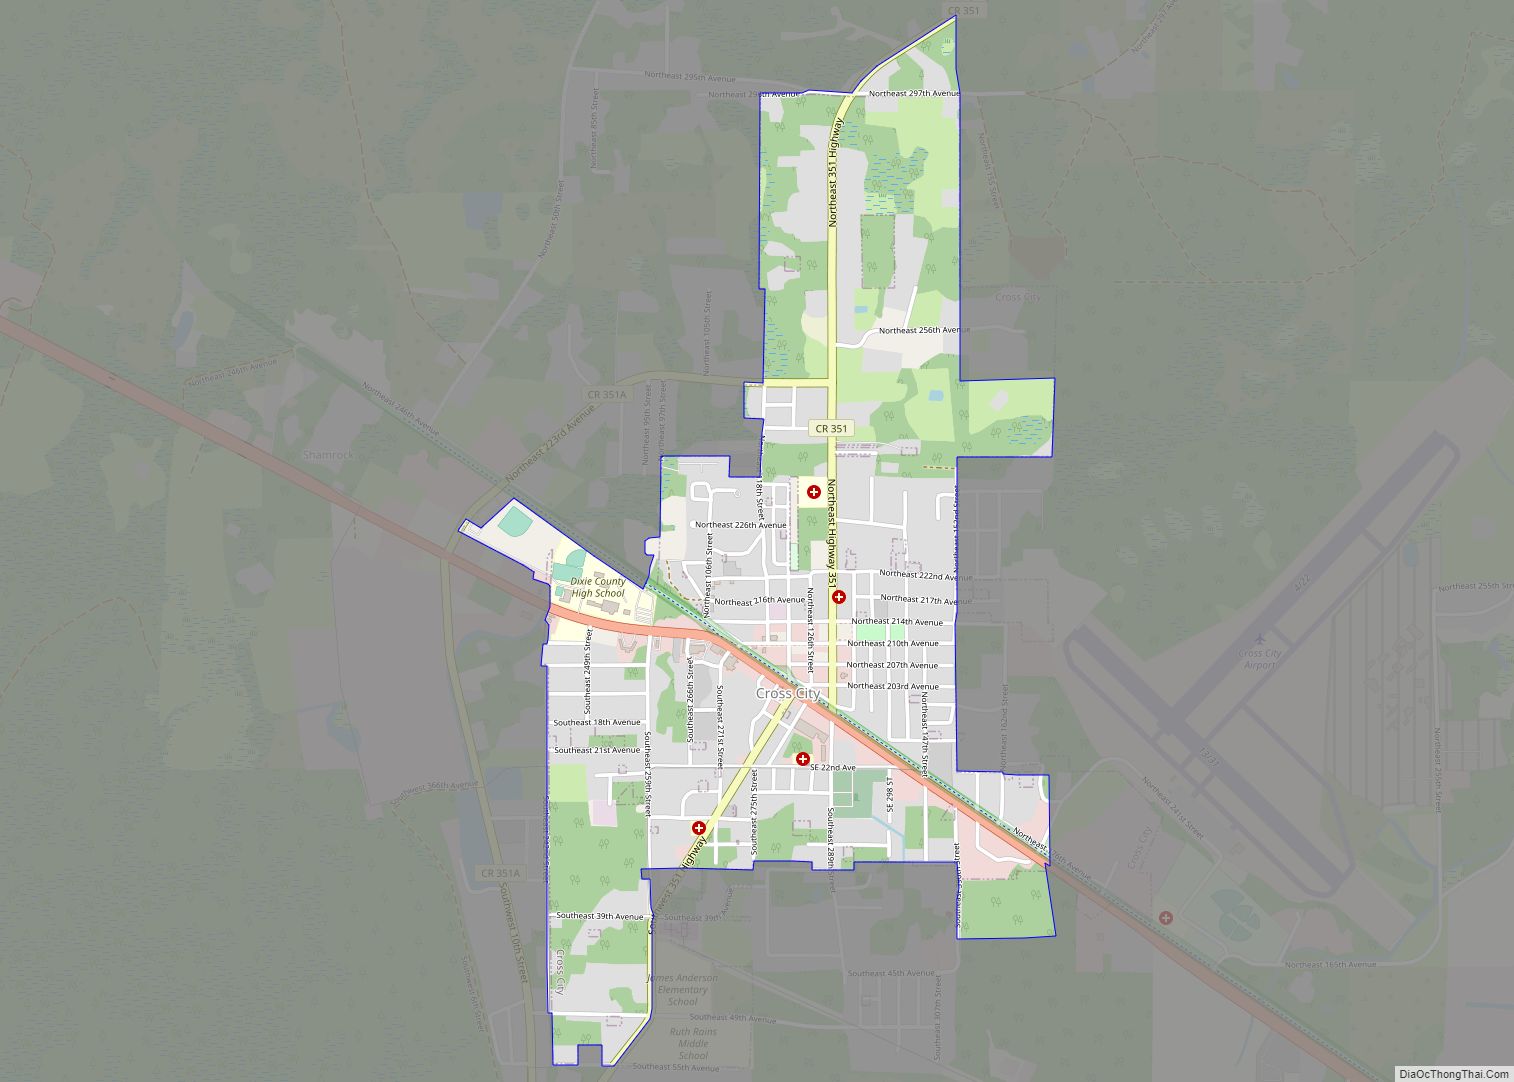 Map of Cross City town